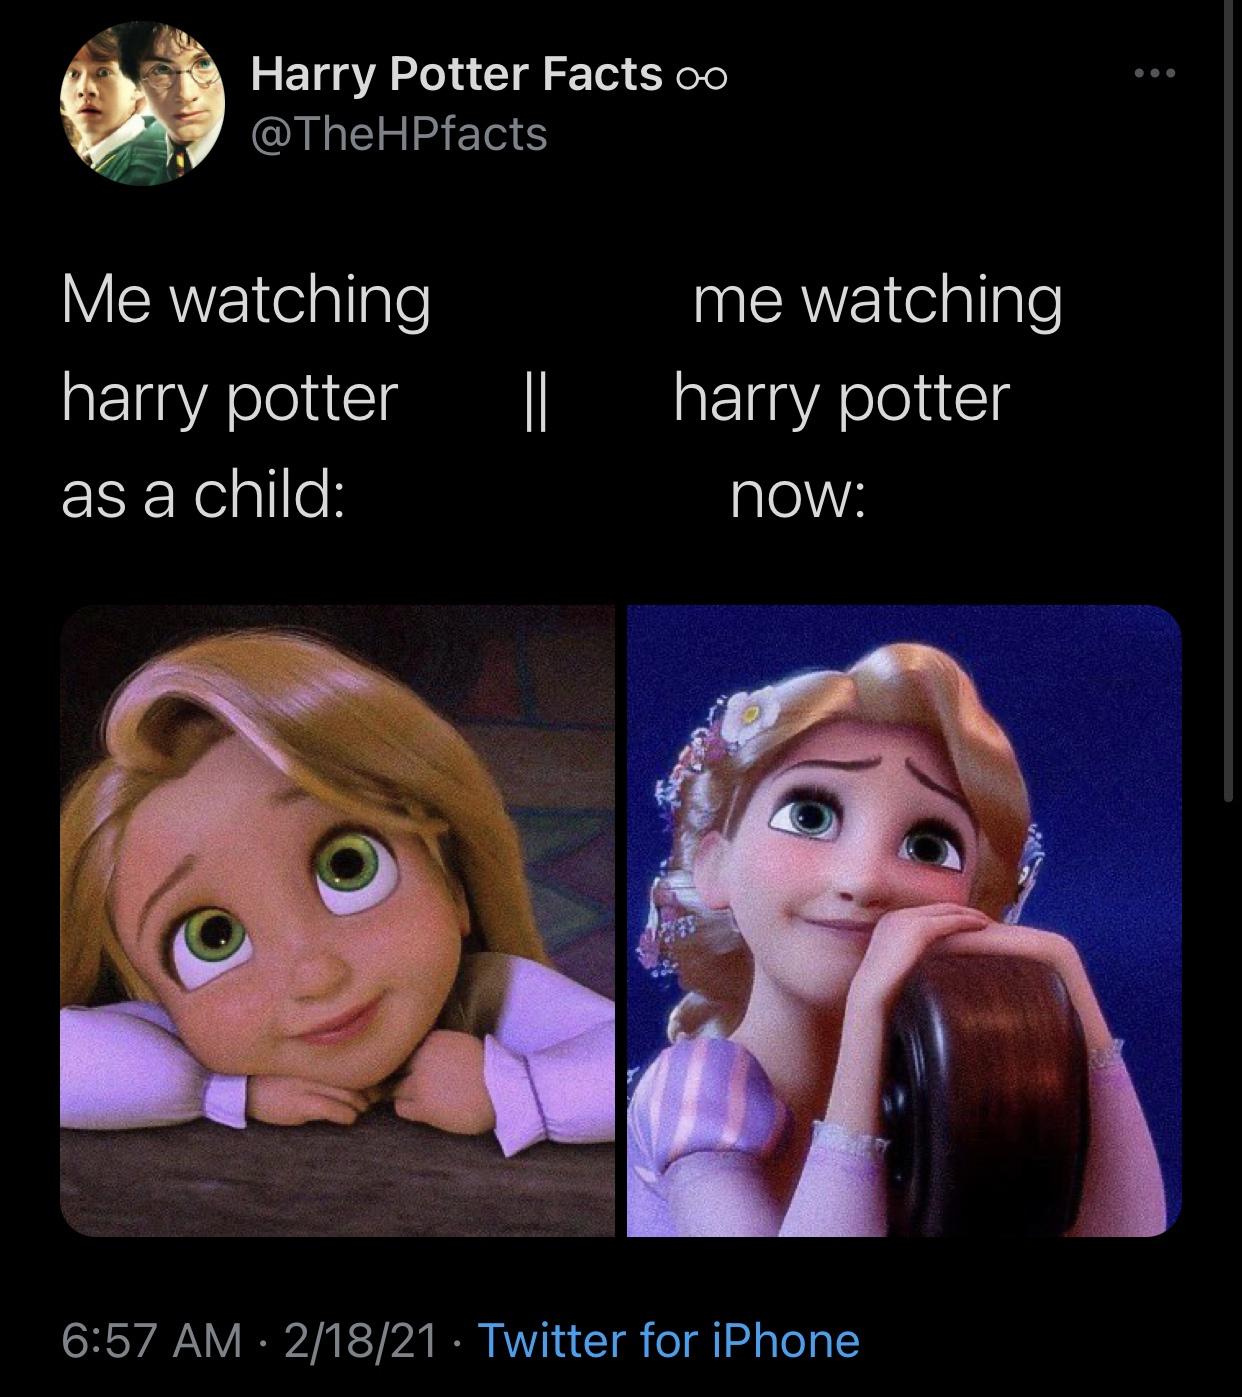 Harry Potter Facts oo Me watching harry potter as a child me watching harry potter Il now 21821 Twitter for iPhone